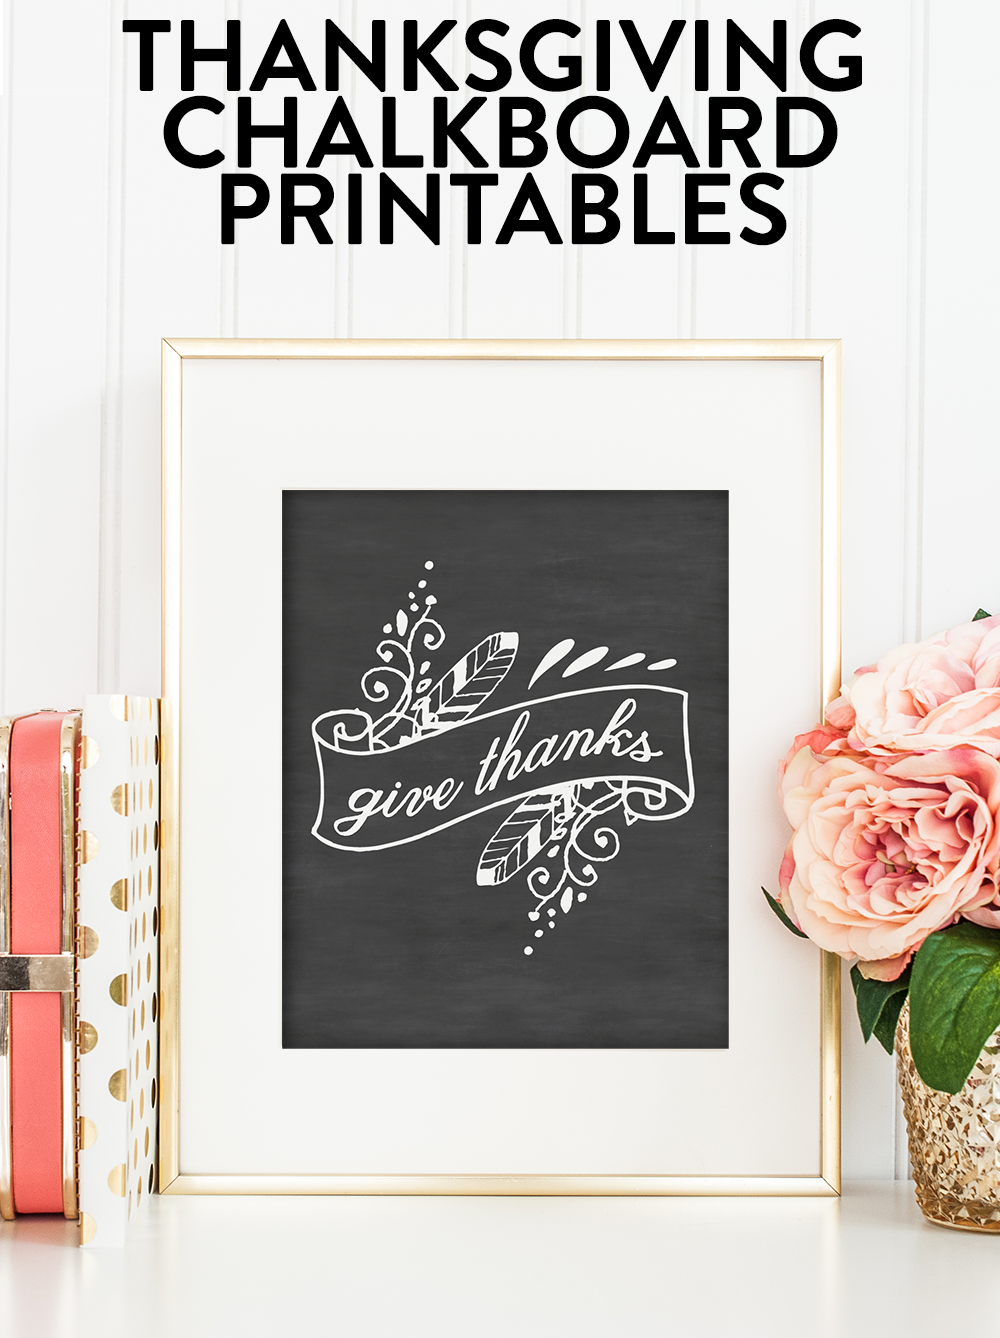 Get these wonderful Thanksgiving chalkboard printables and celebrate the season in style!